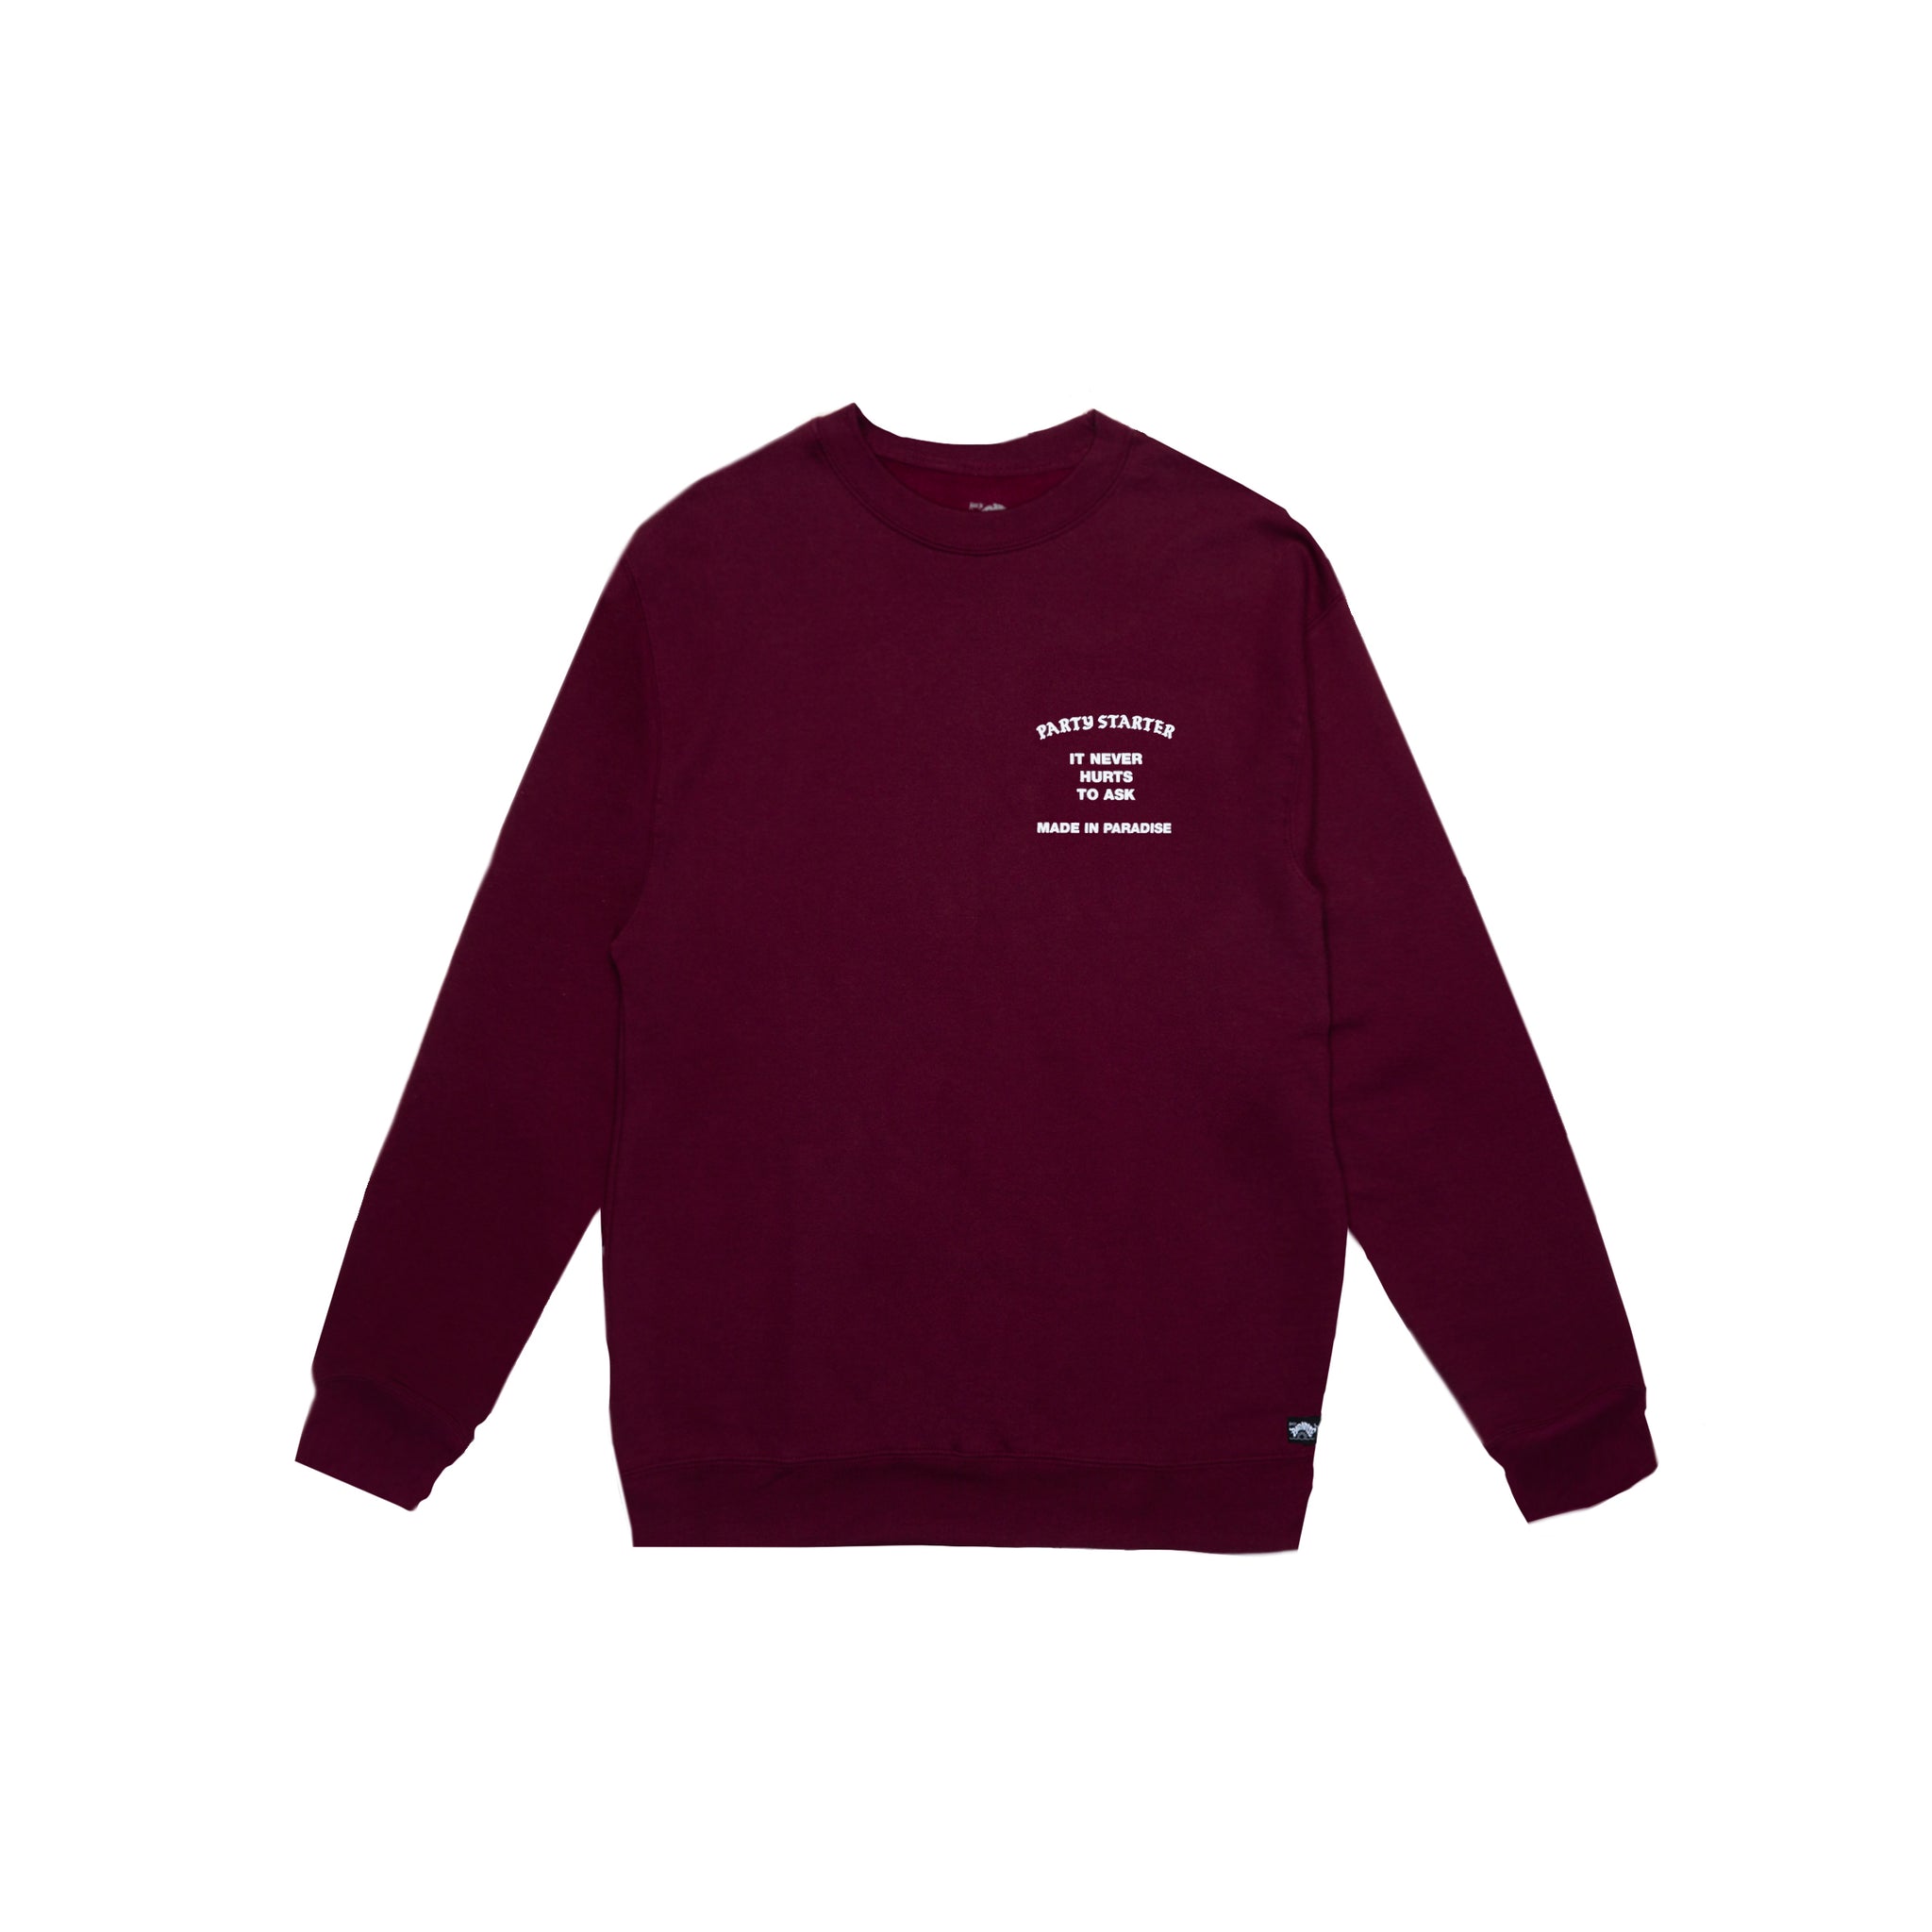 Front view of Made in Paradise World Drug Trade Collection "PARTY STARTER" burgundy crewneck